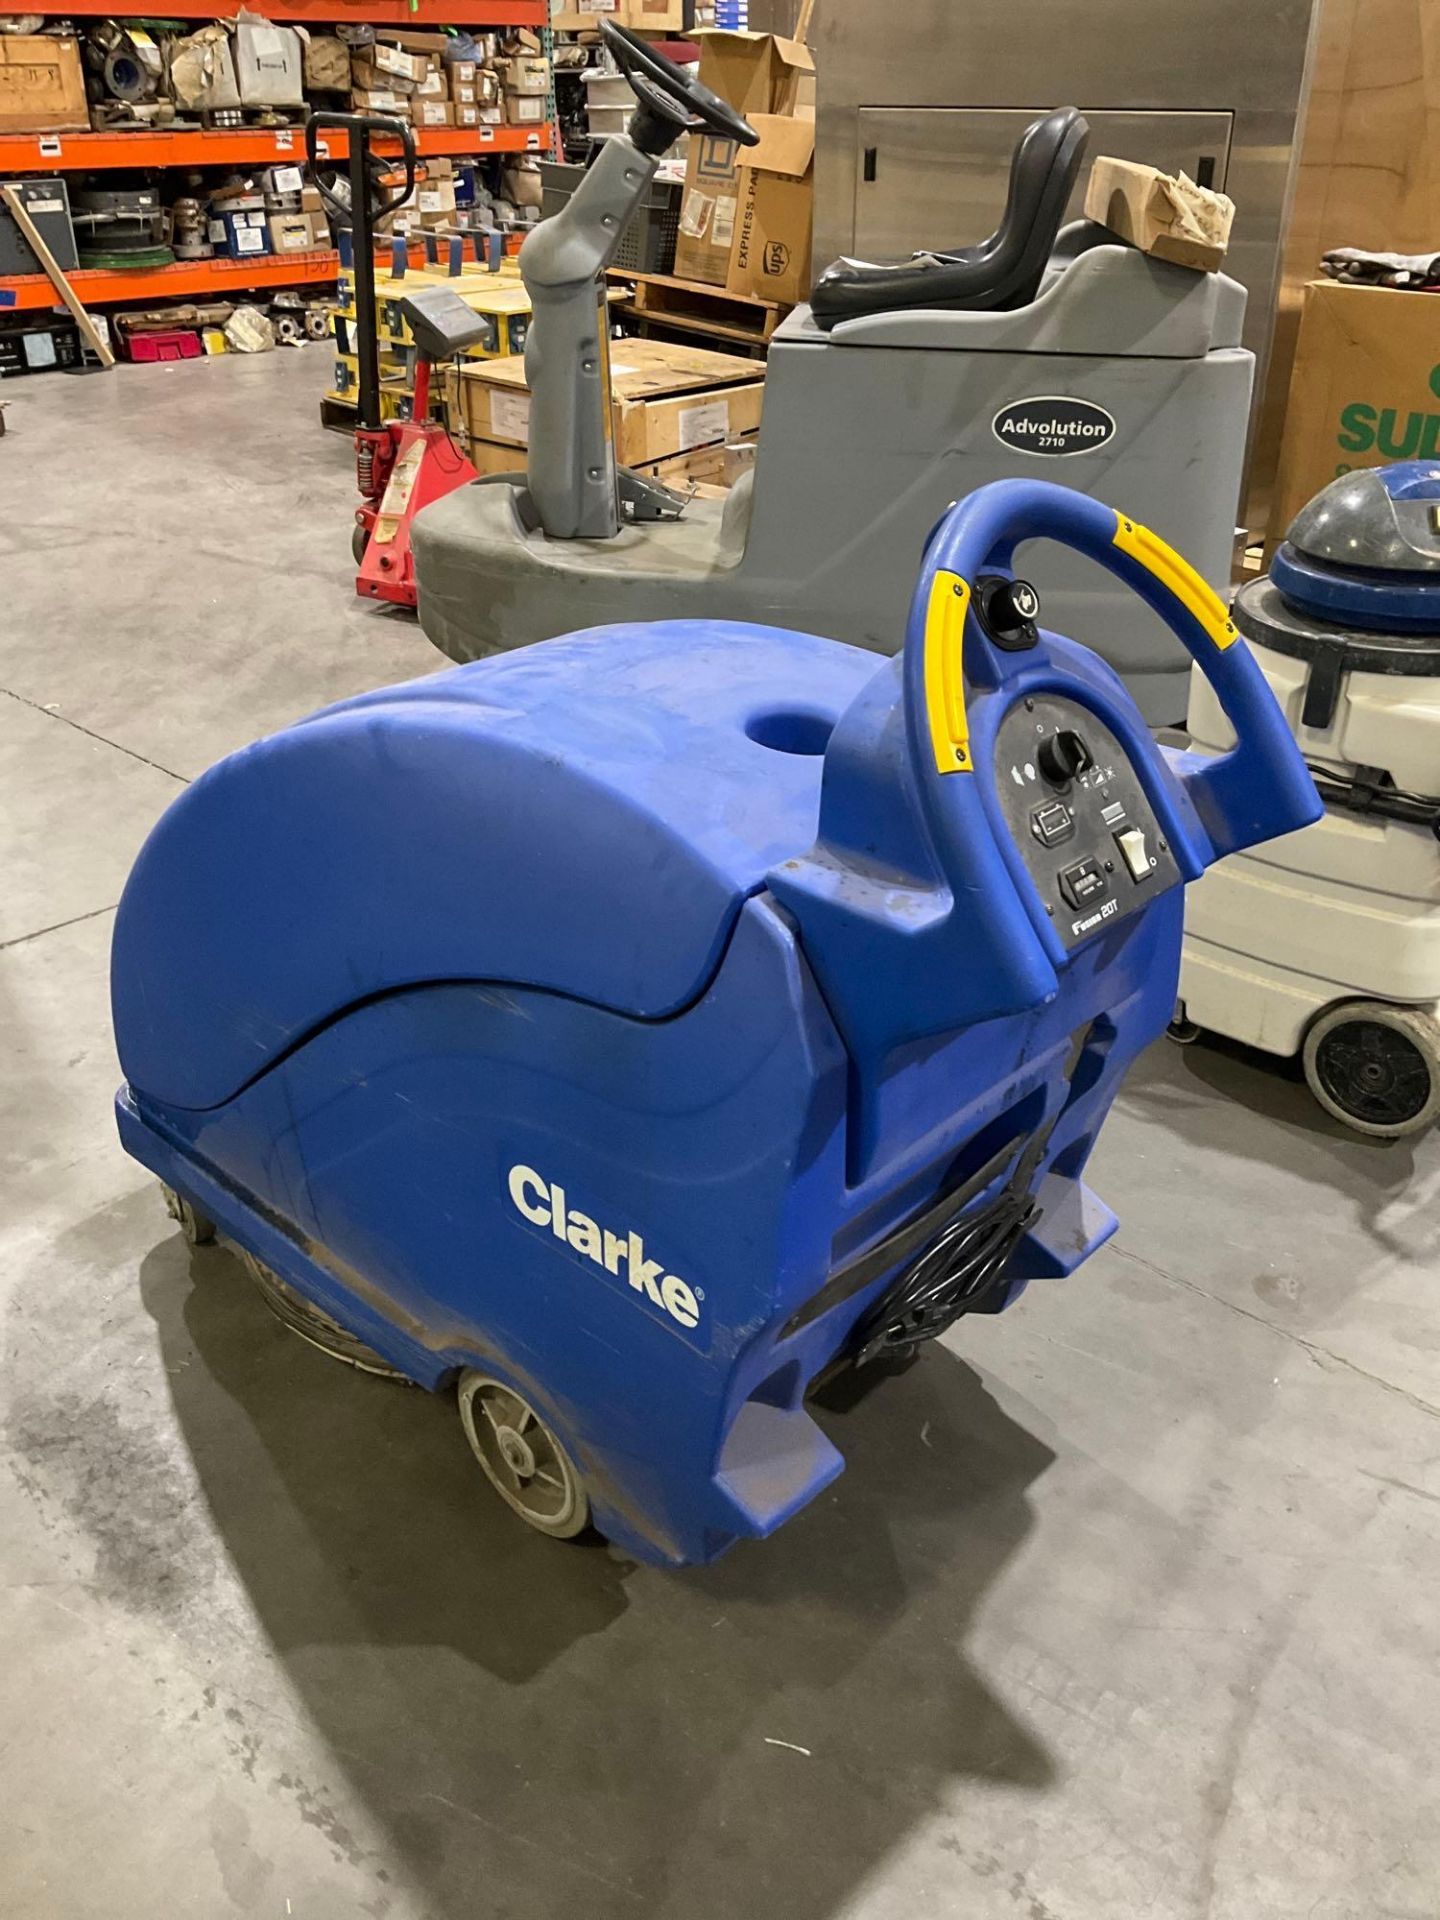 CLARKE WALK BEHIND FLOOR BURNISHER MODEL FUSION 20T 195 AH, ELECTRIC, APPROX 36 VOLTS, NEW BATTERIES - Image 3 of 12